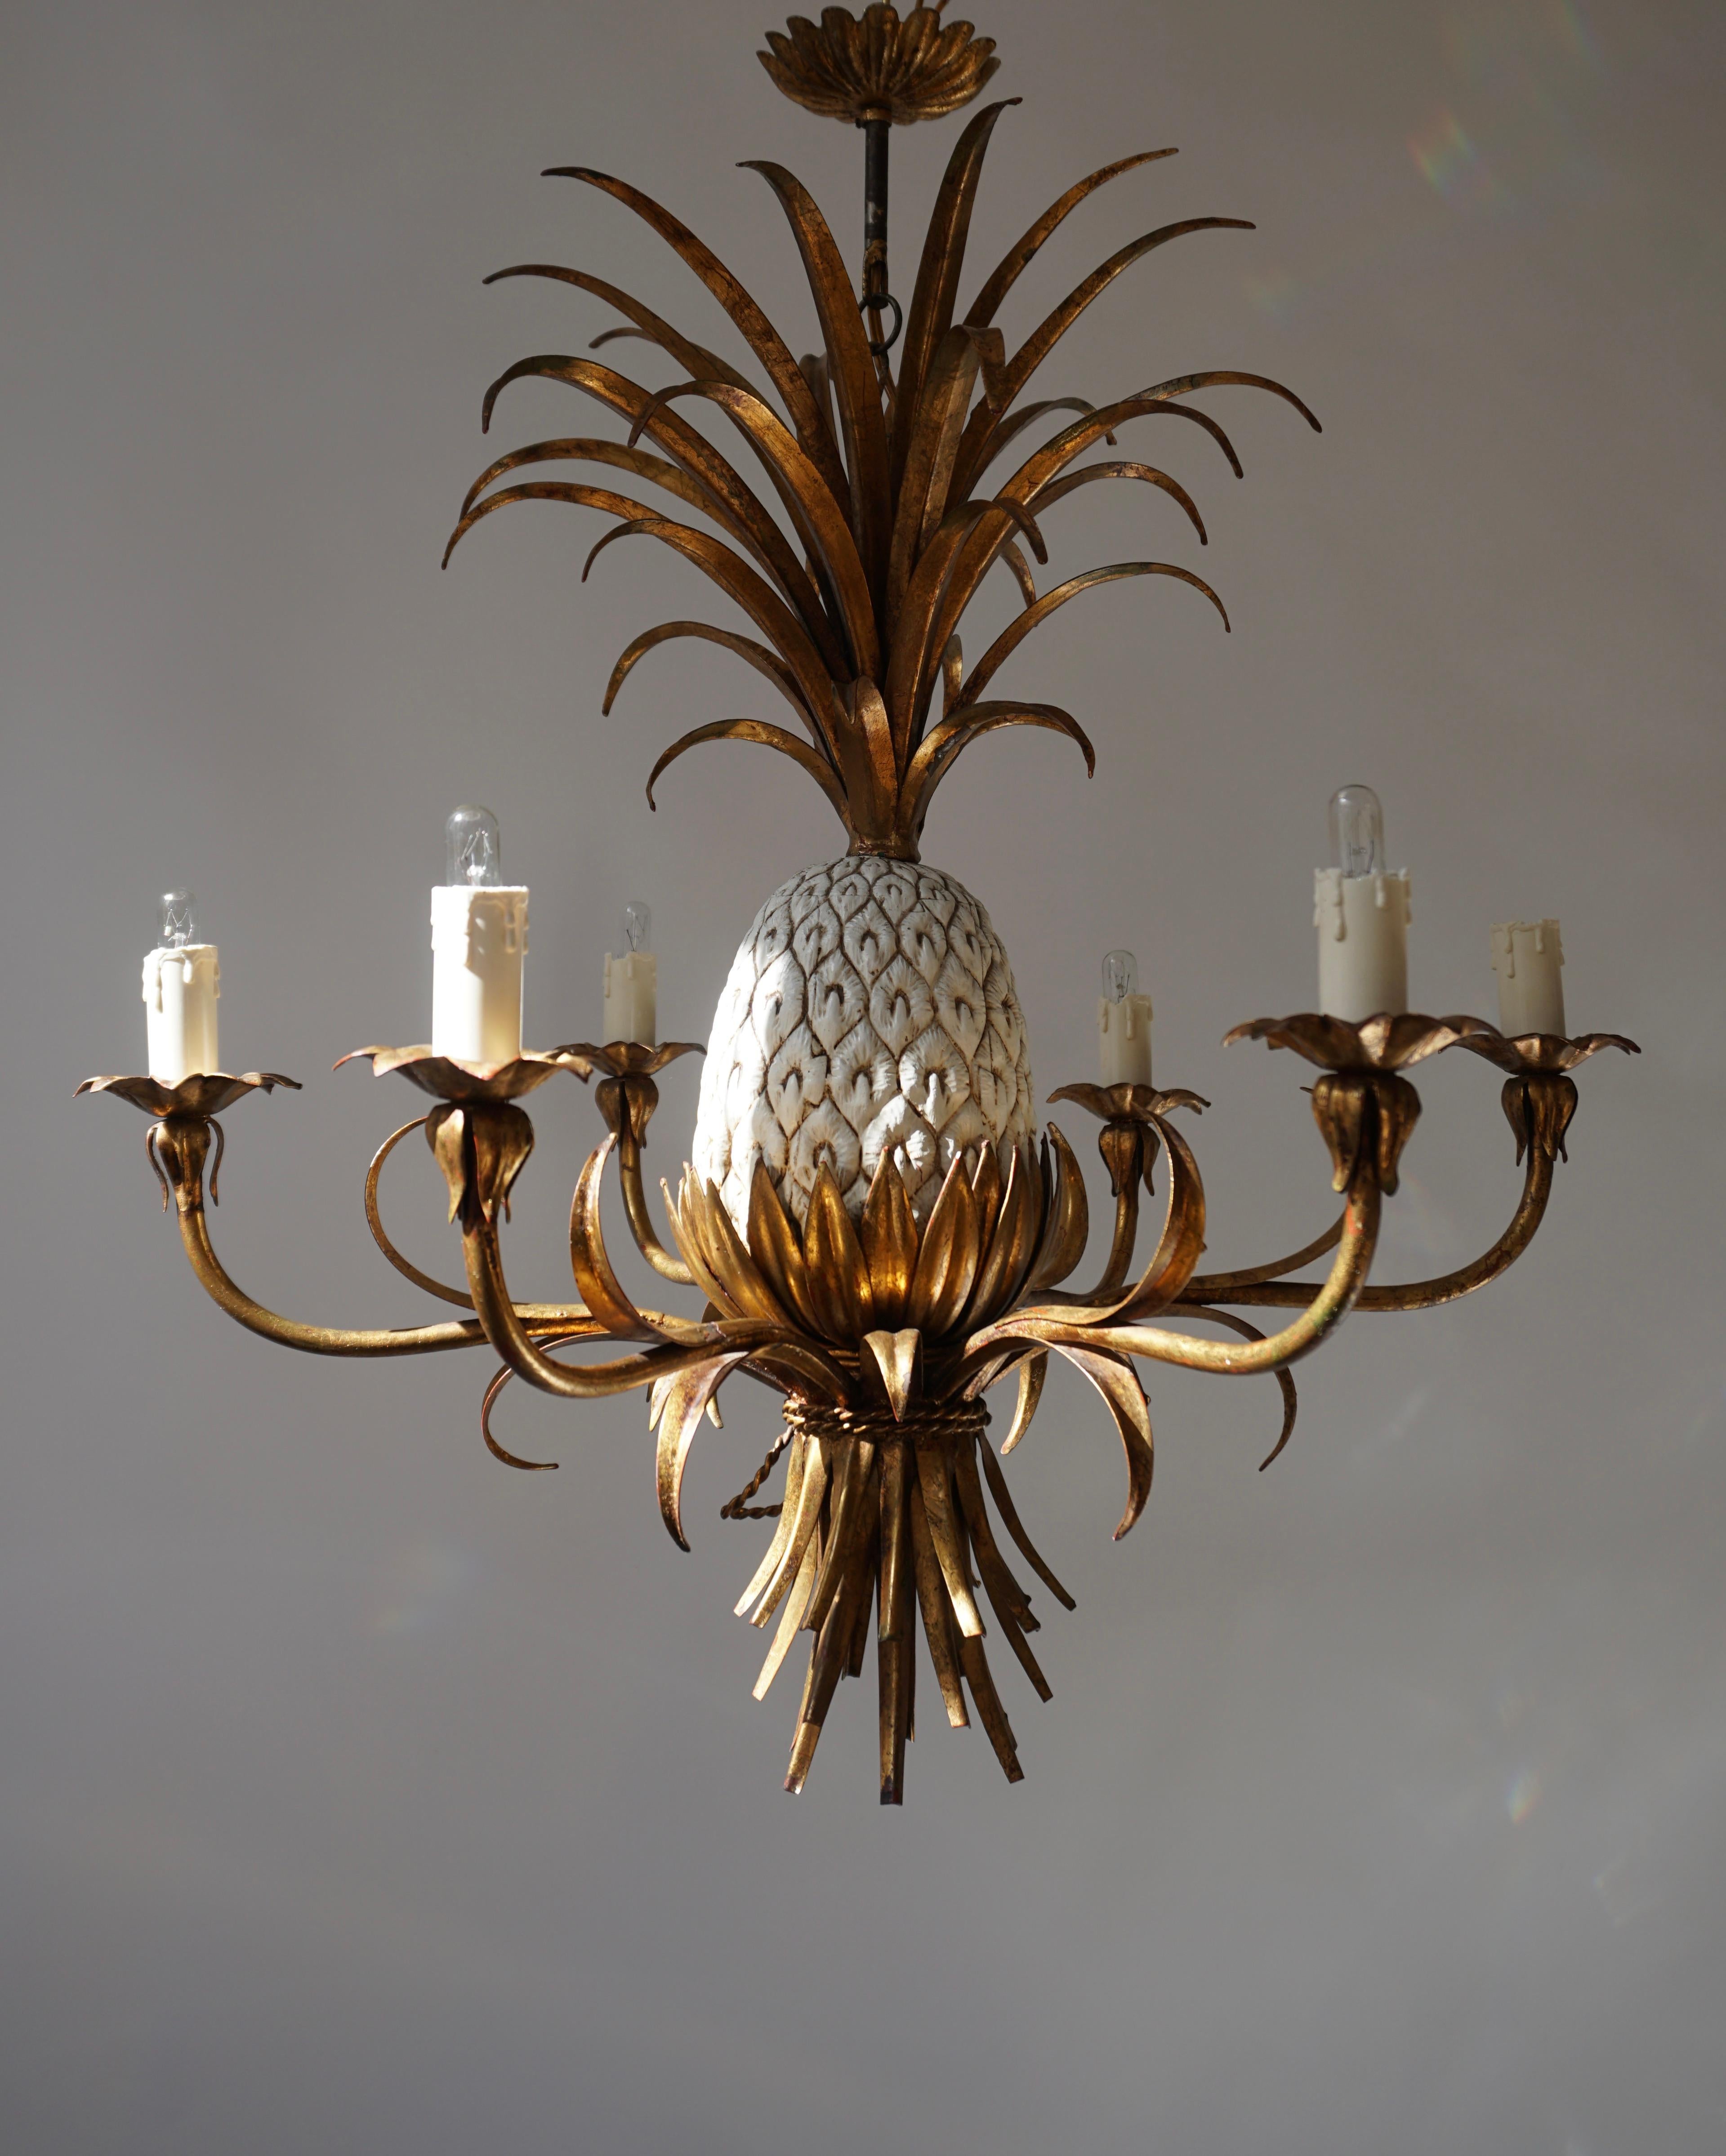 Hollywood Regency Italian Ceramic and Brass Pineapple Chandelier, circa 1970s For Sale